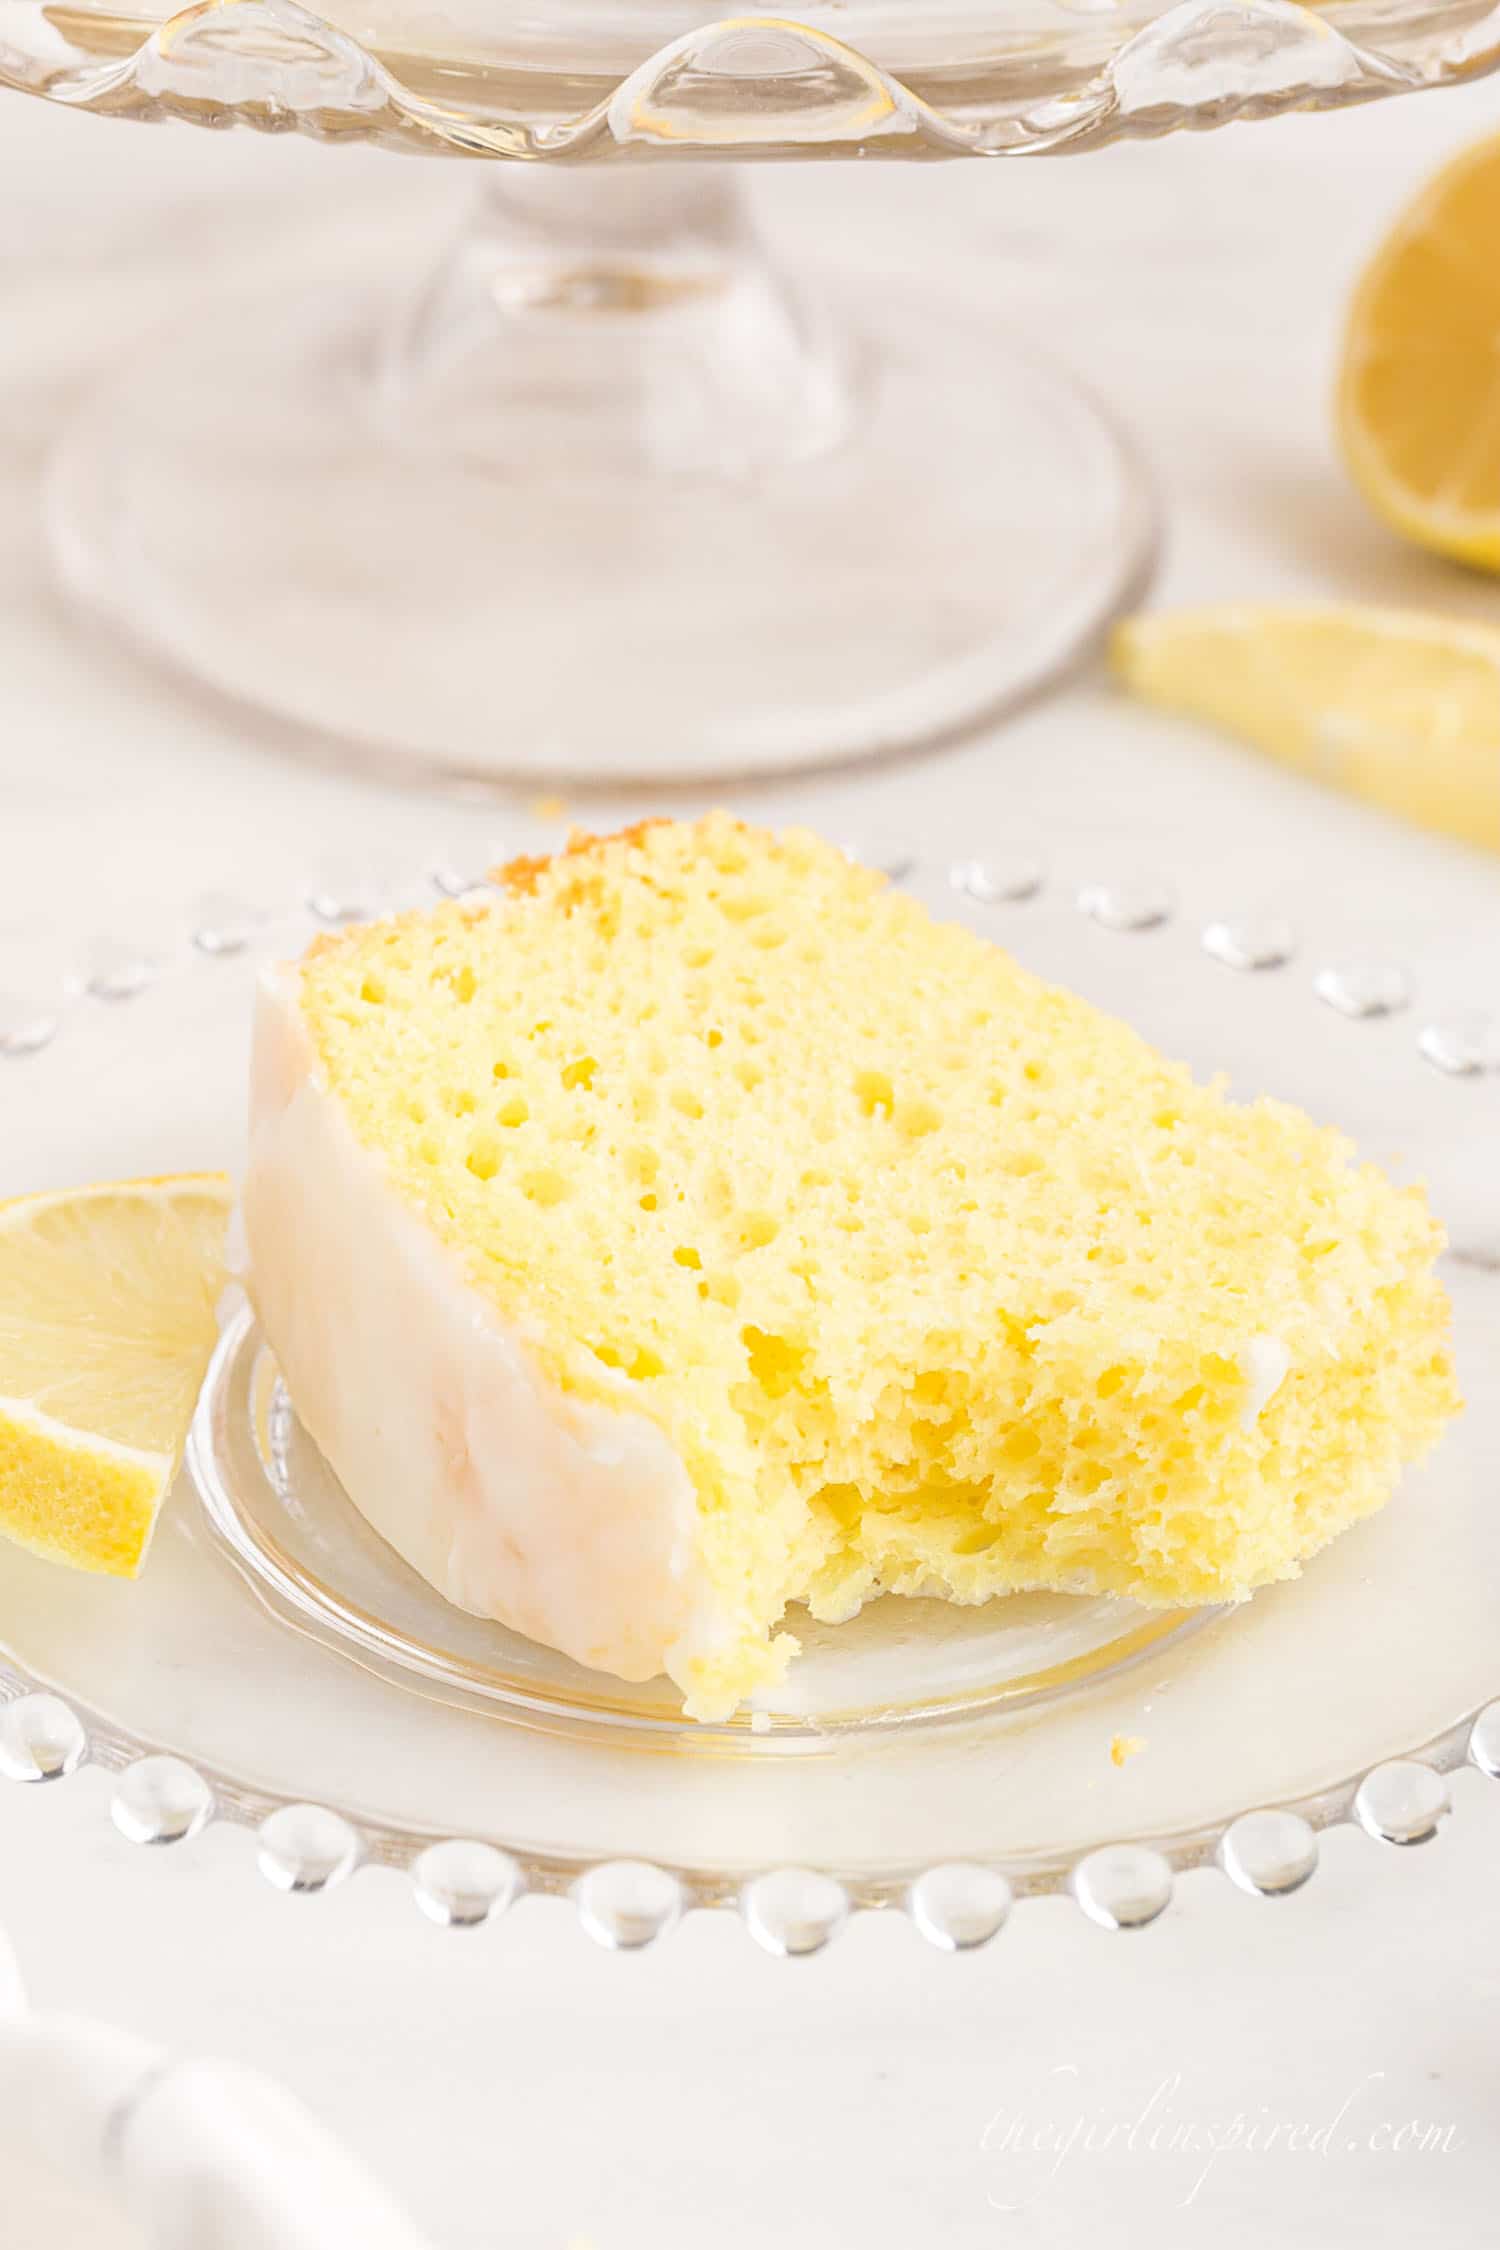 a slice of lemon chiffon cake on a small glass plate with a bite taken out